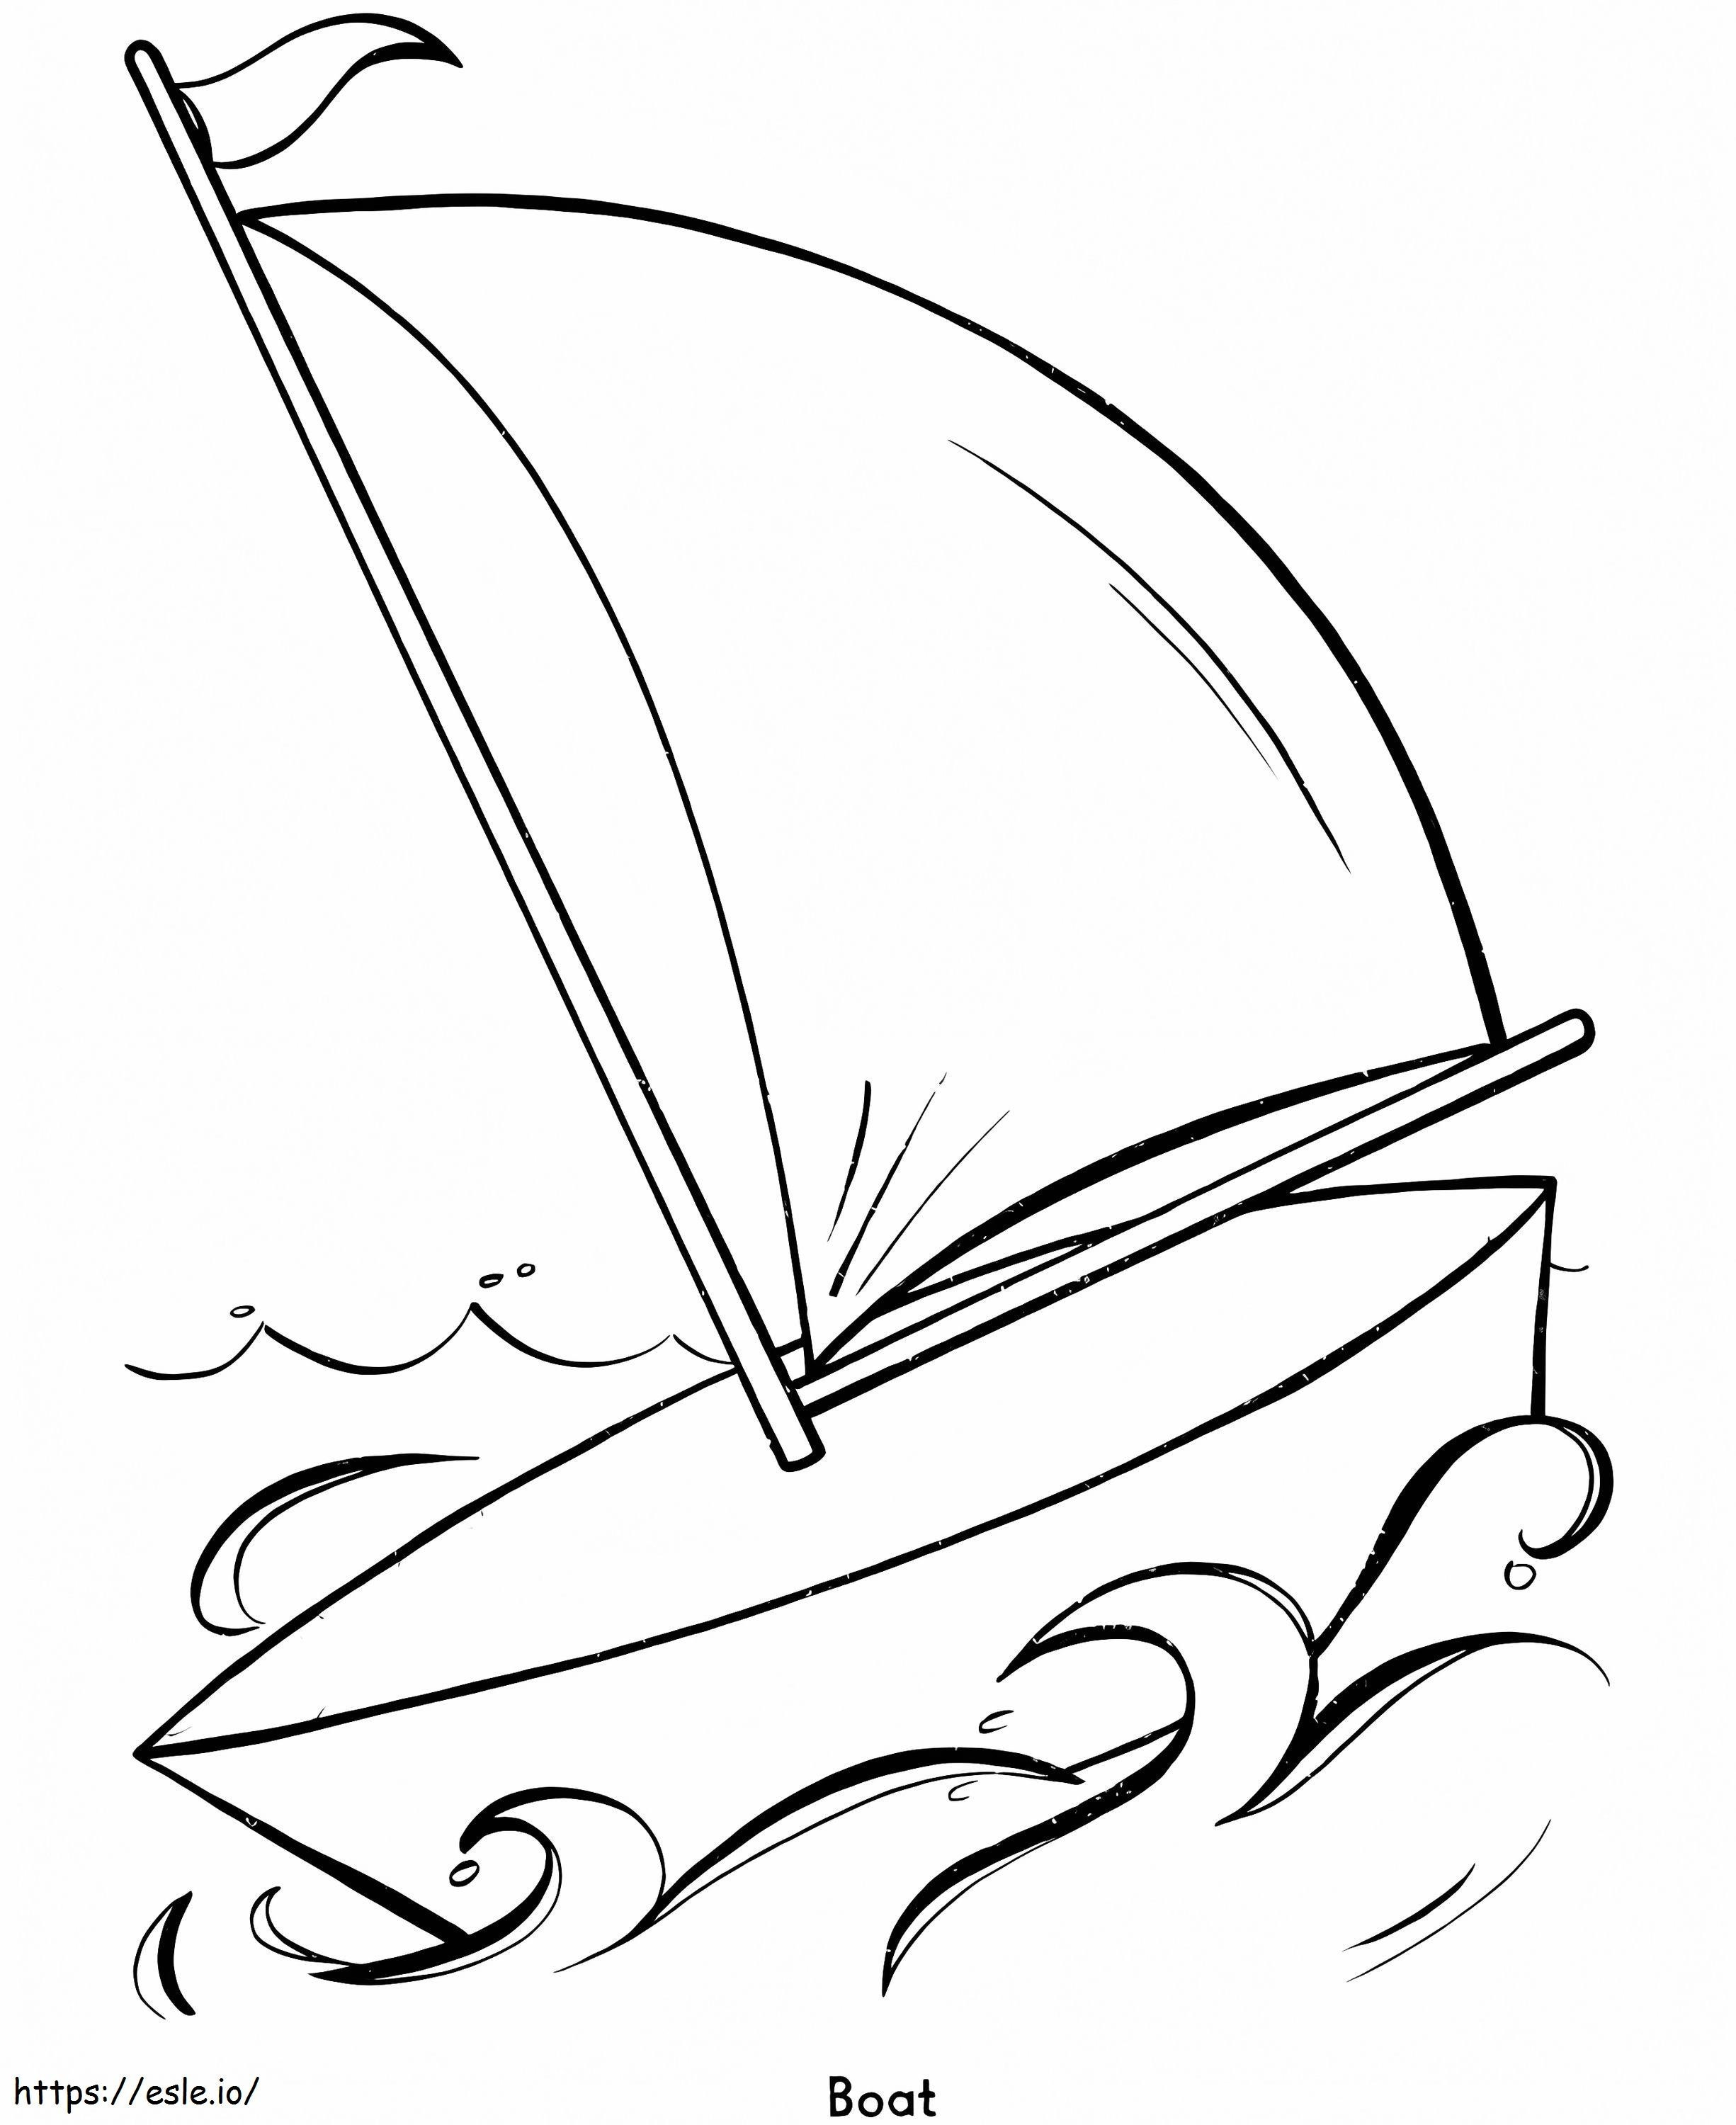 Print Boat coloring page